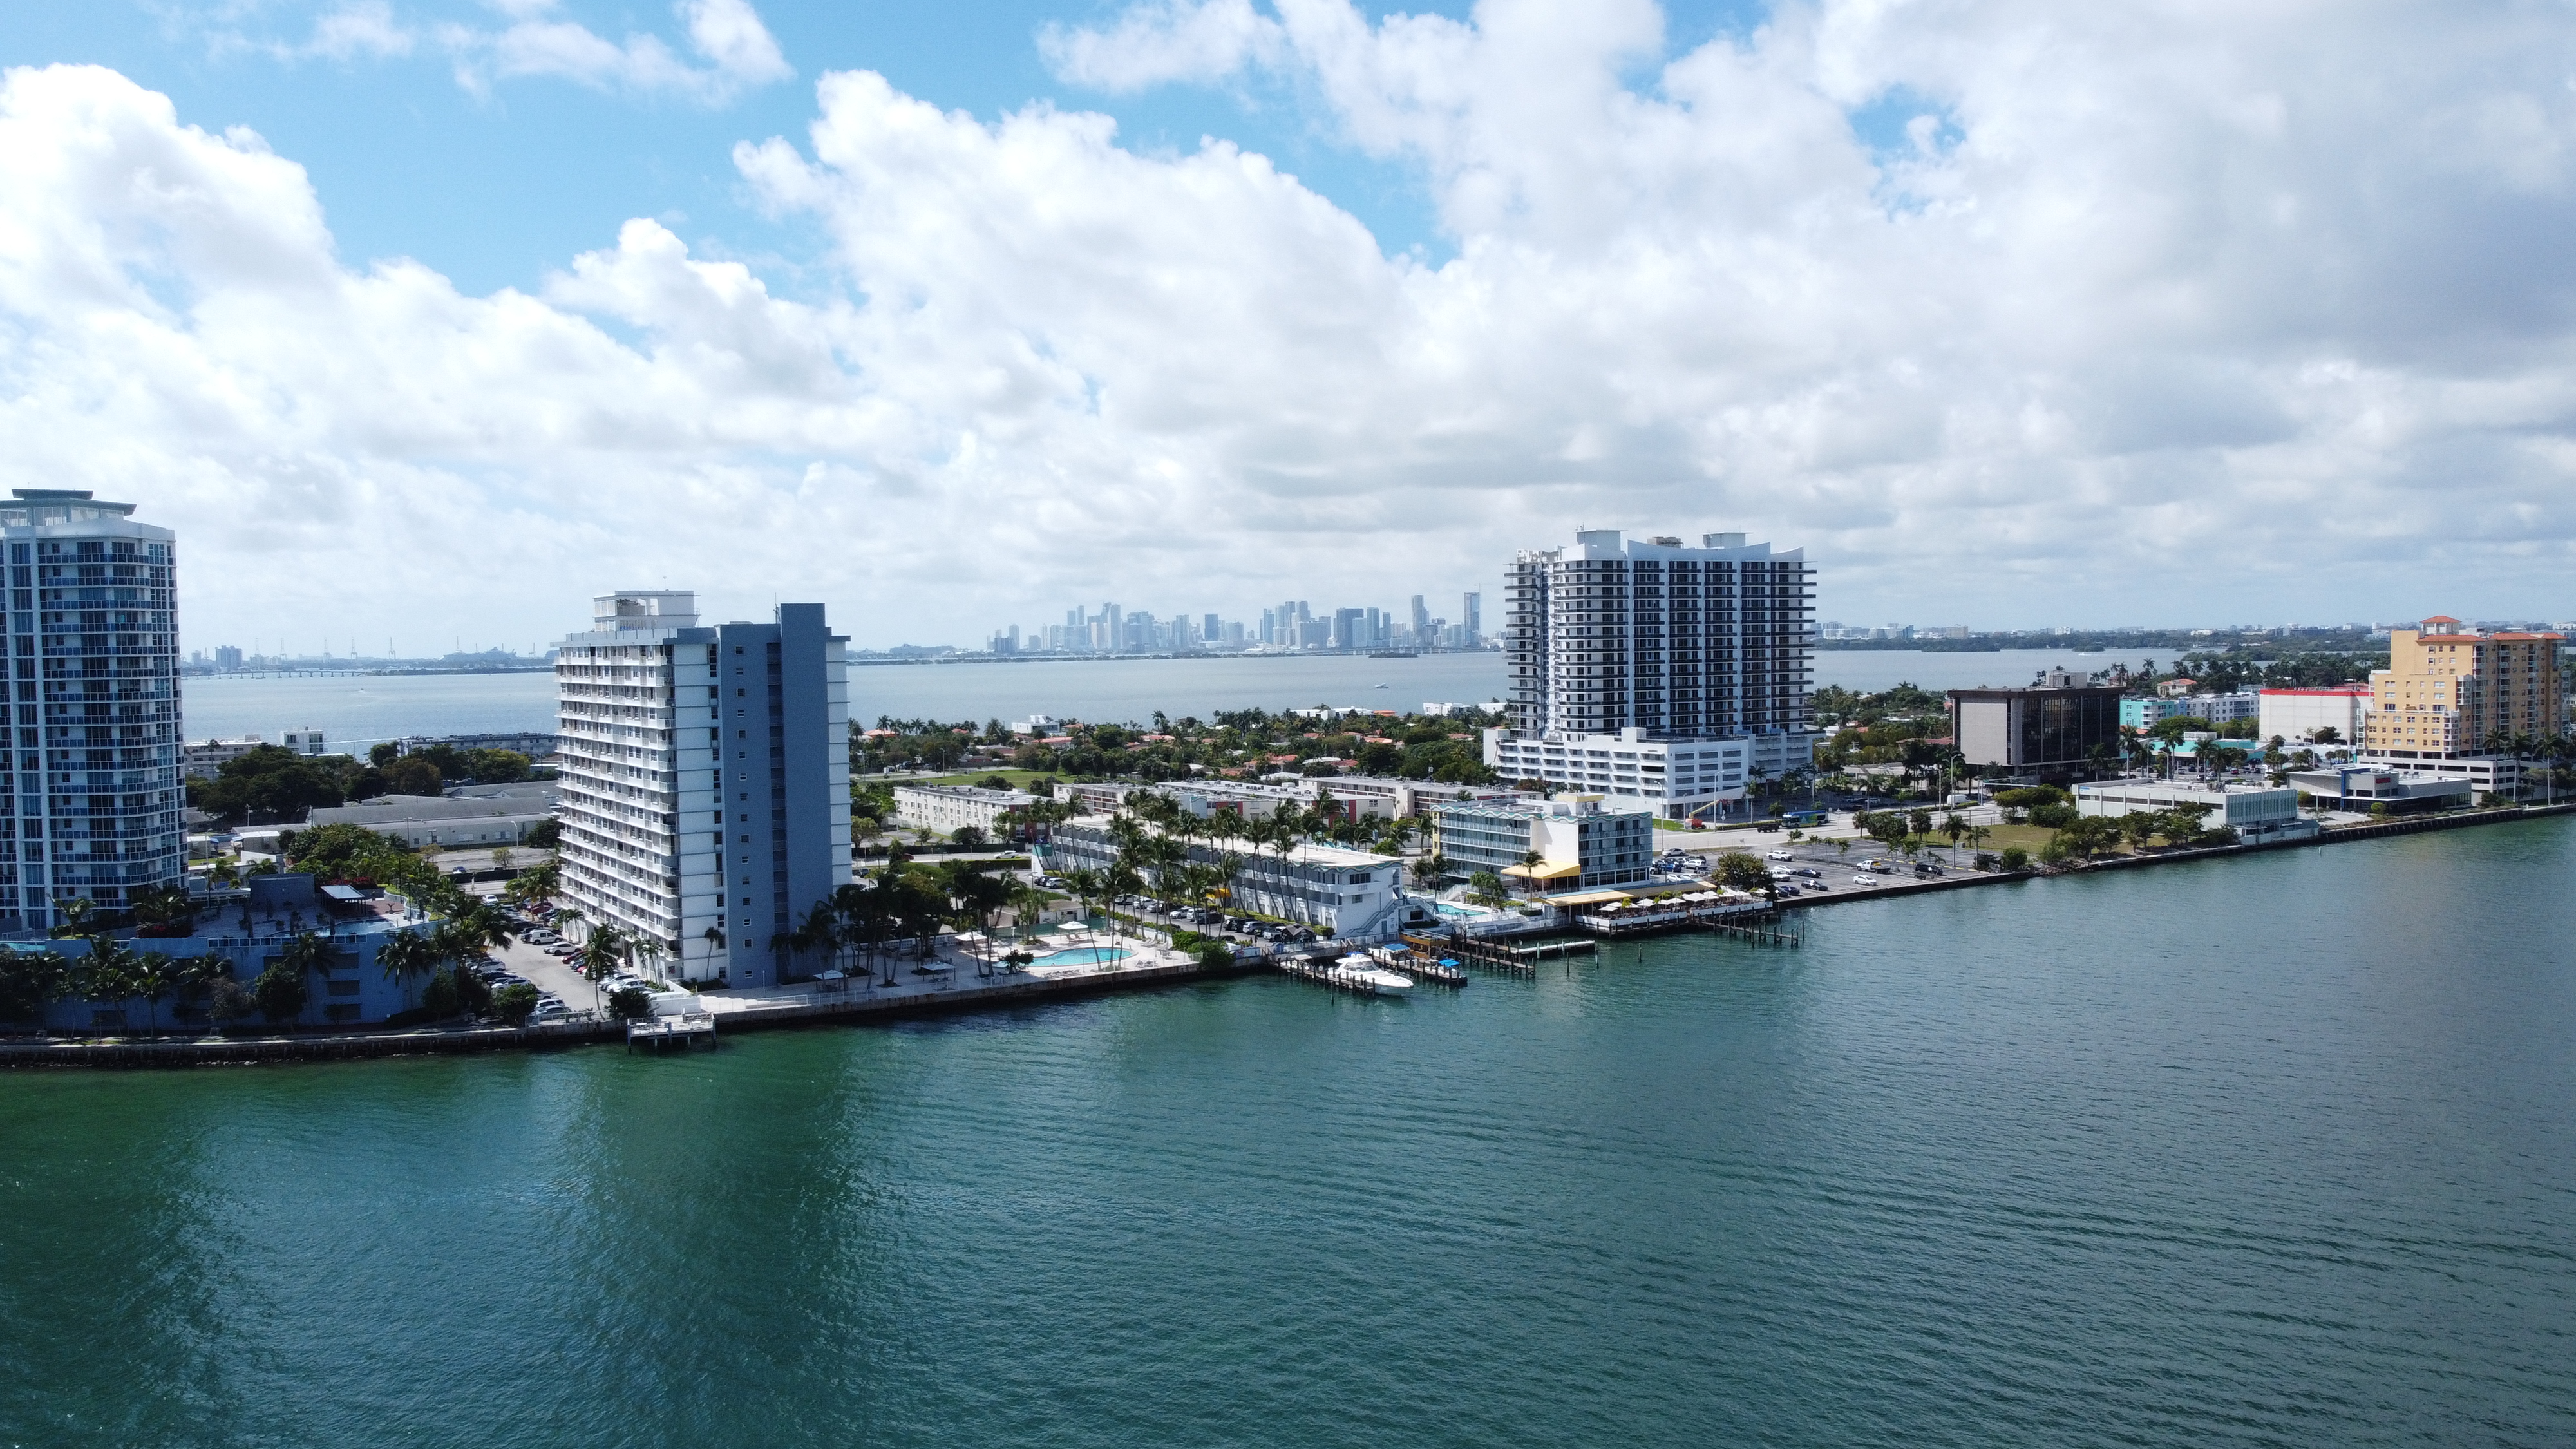 North Bay Village and Downtown Miami.JPG